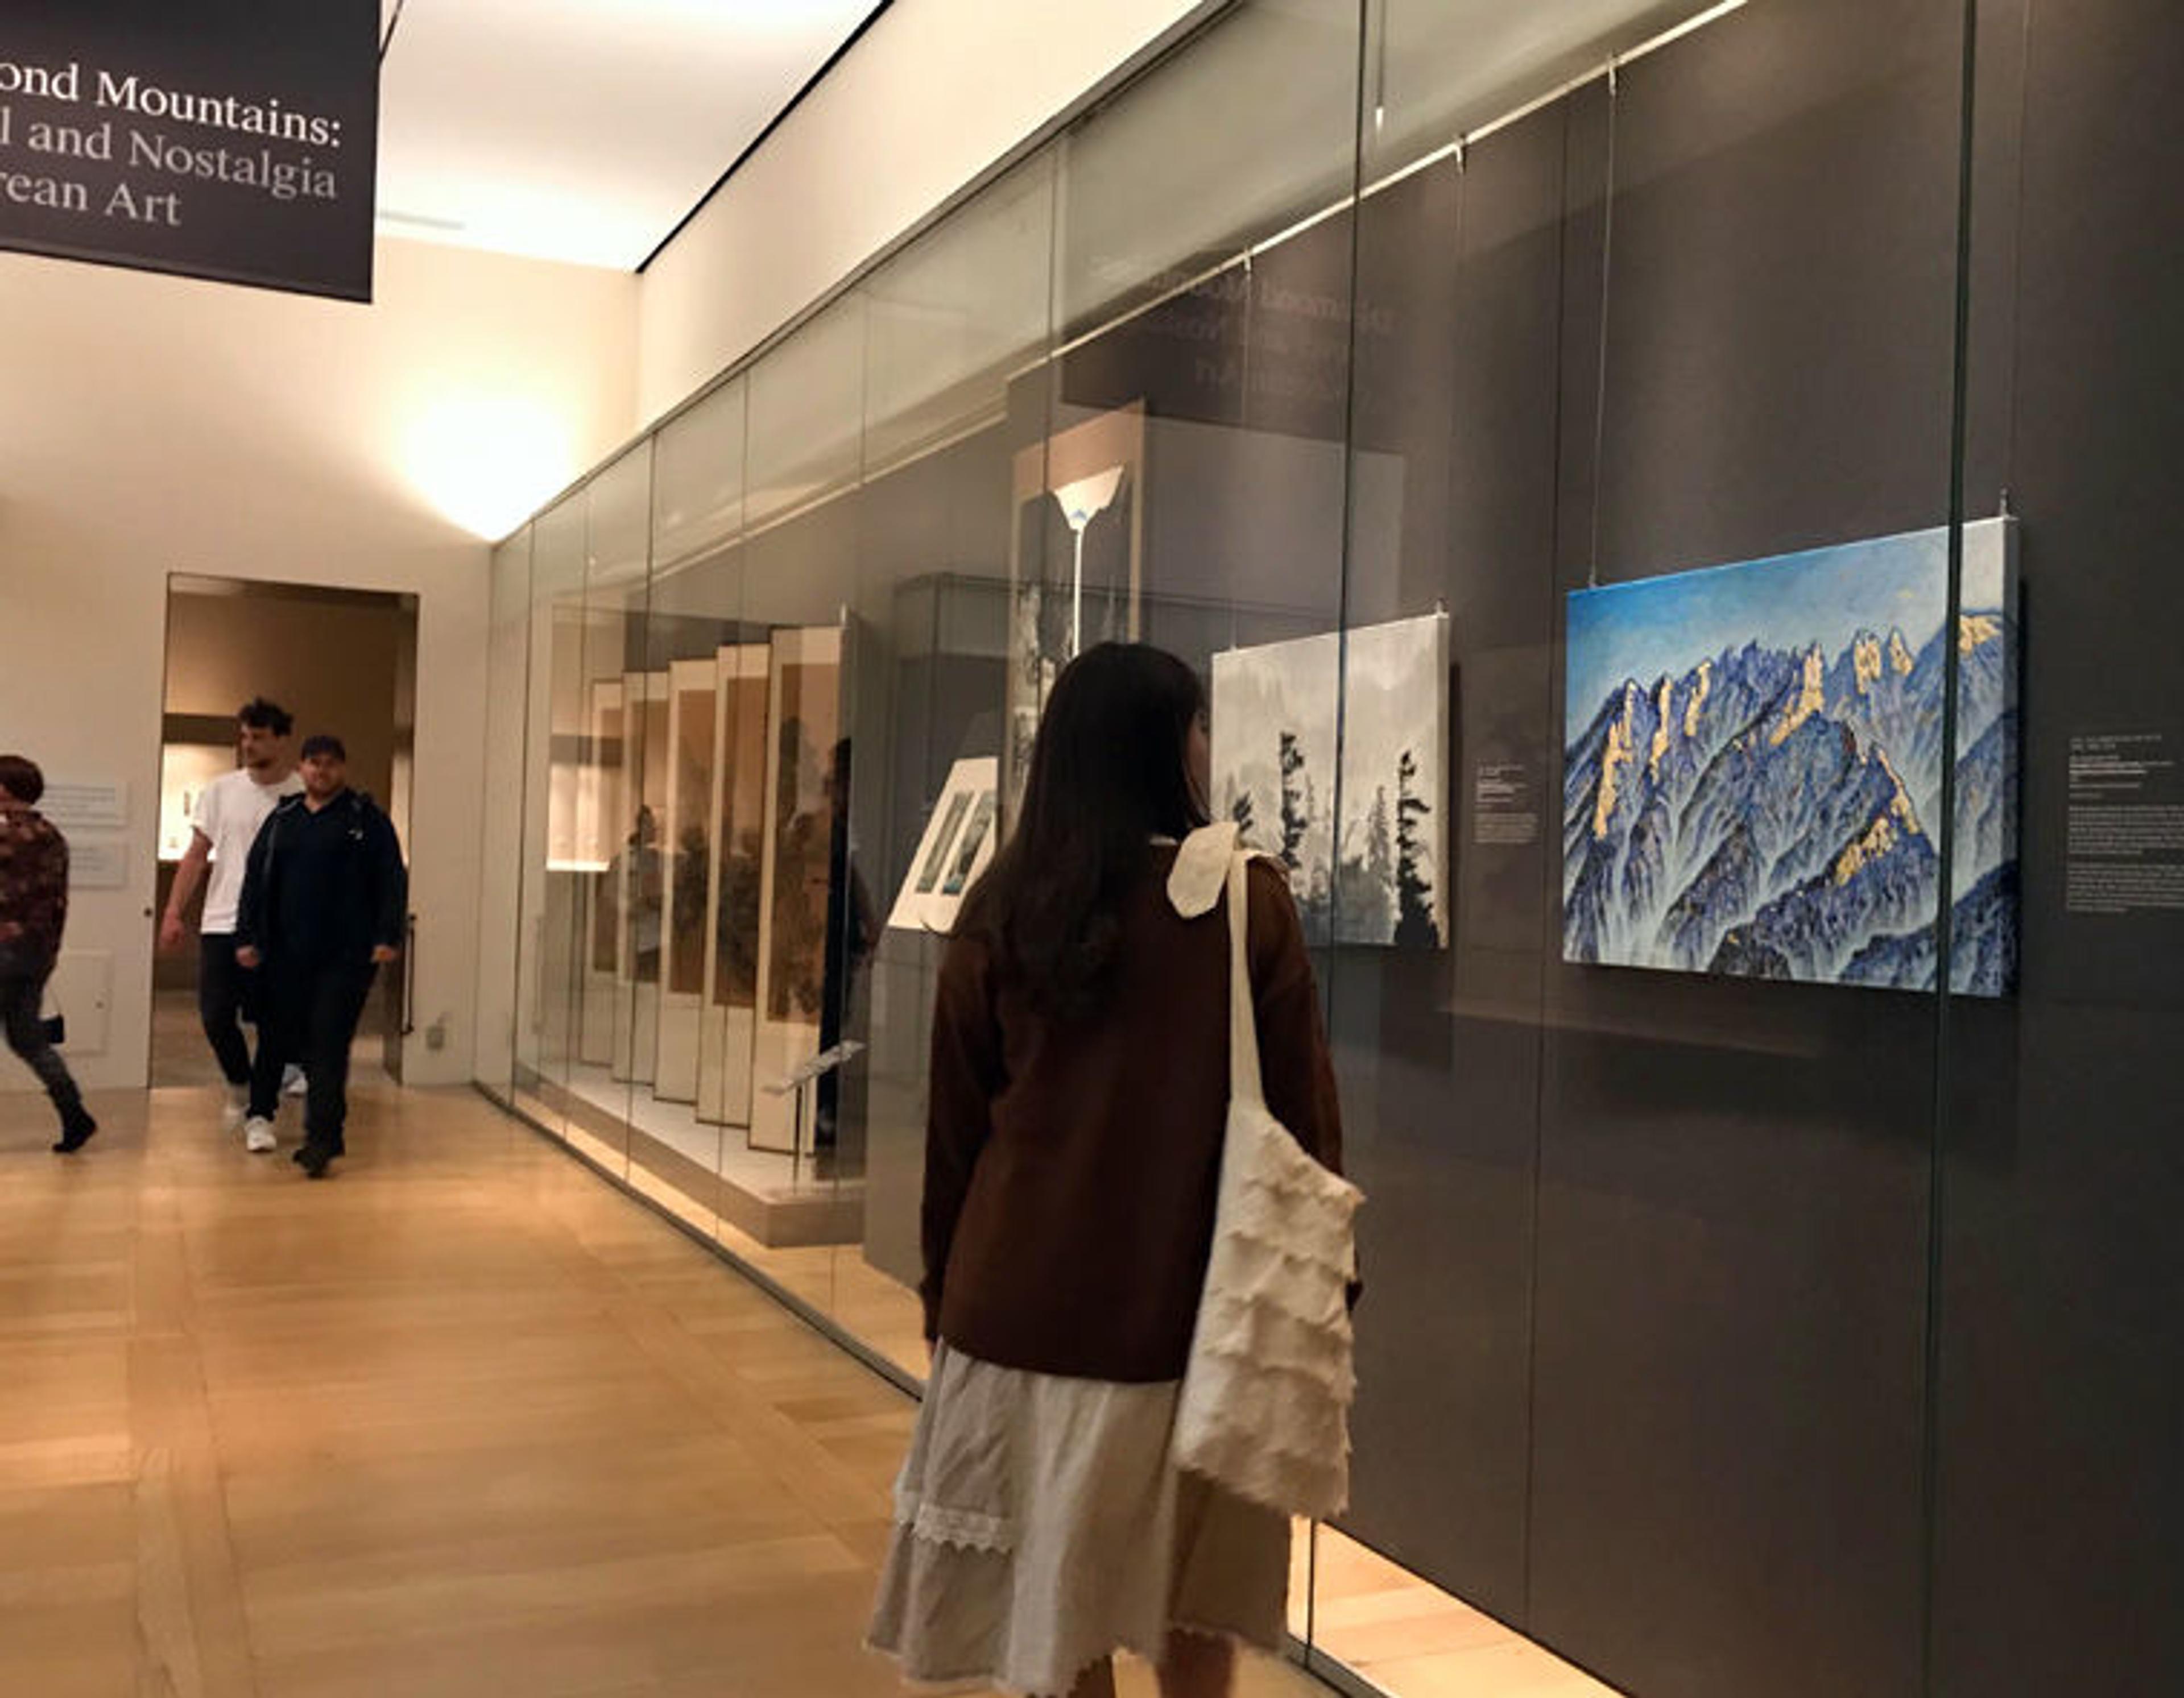 A woman reflects on two paintings of the Diamond Mountains in the Arts of Korea gallery